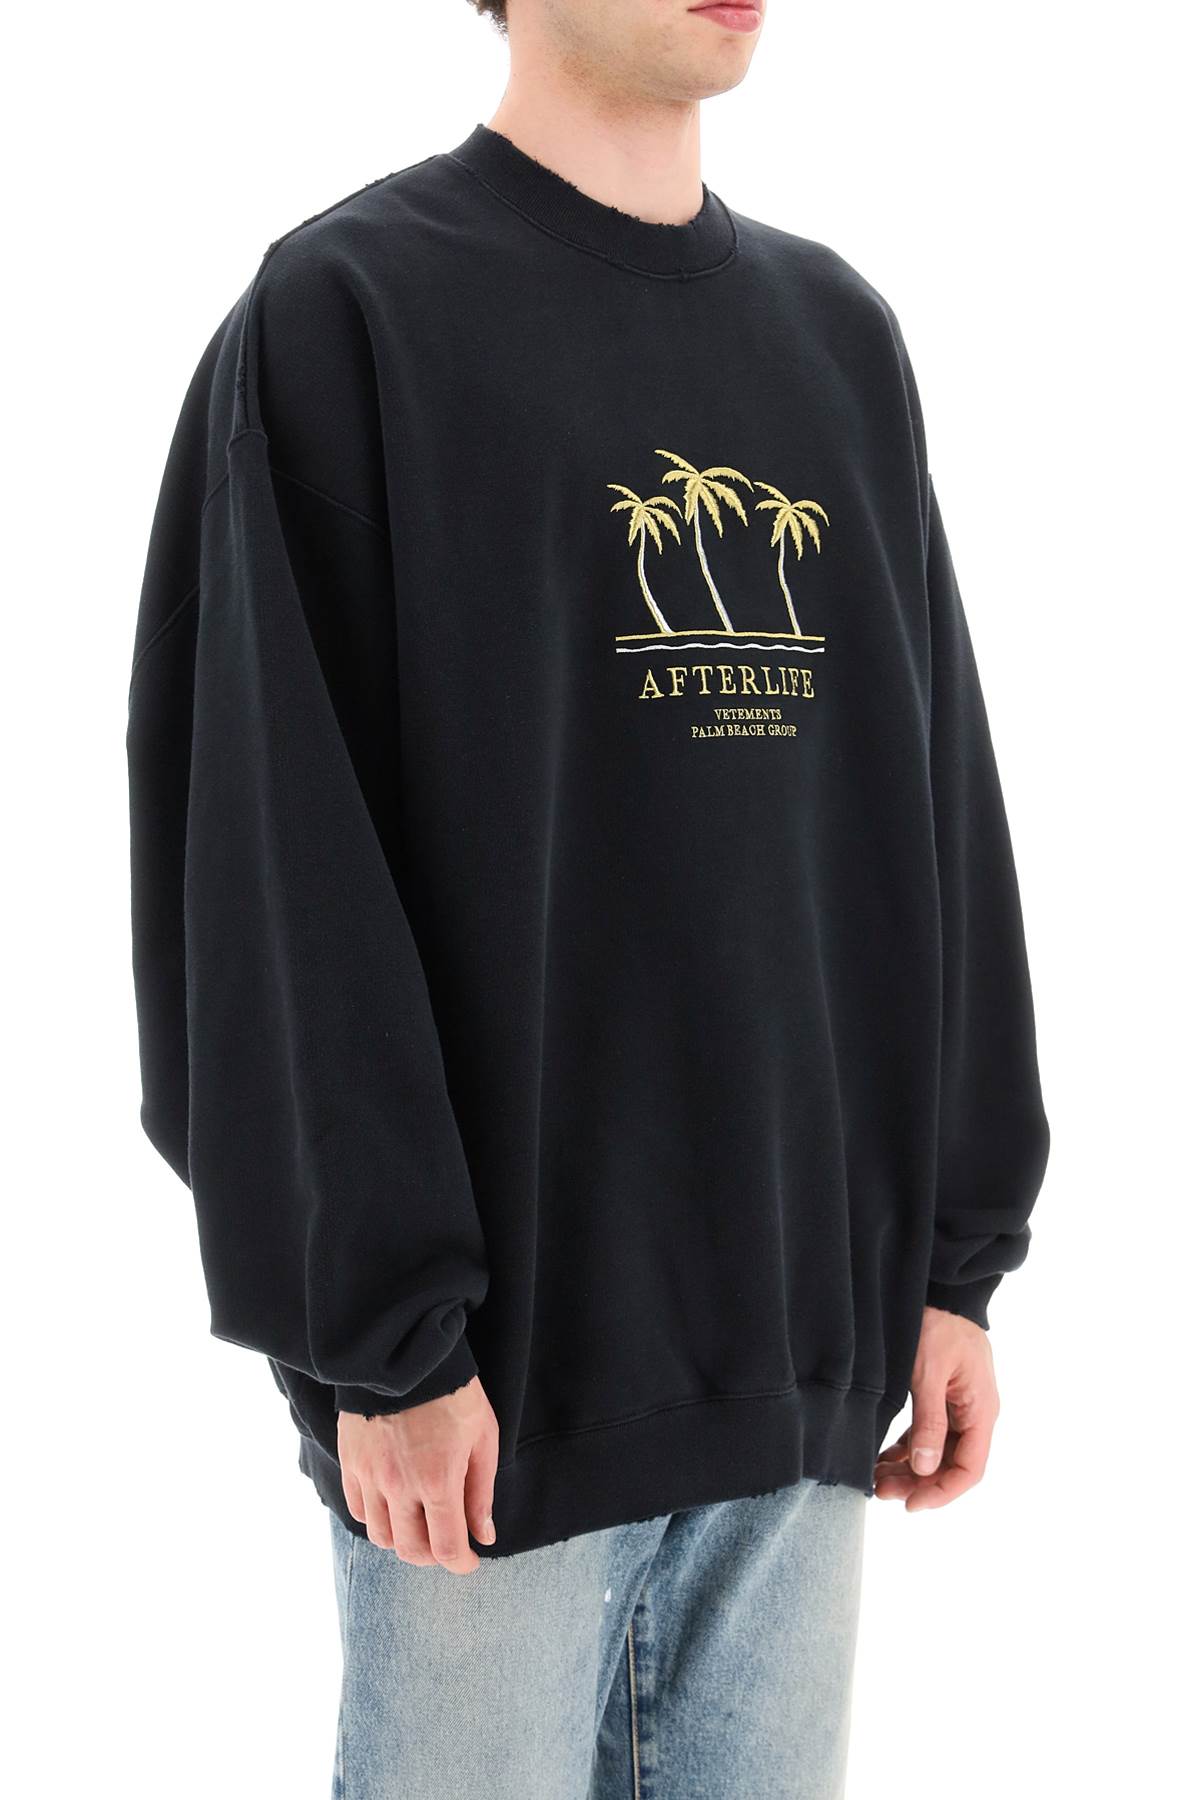 VETEMENTS Men's Black Sweatshirt with Embroidered Logo and Palm Motif